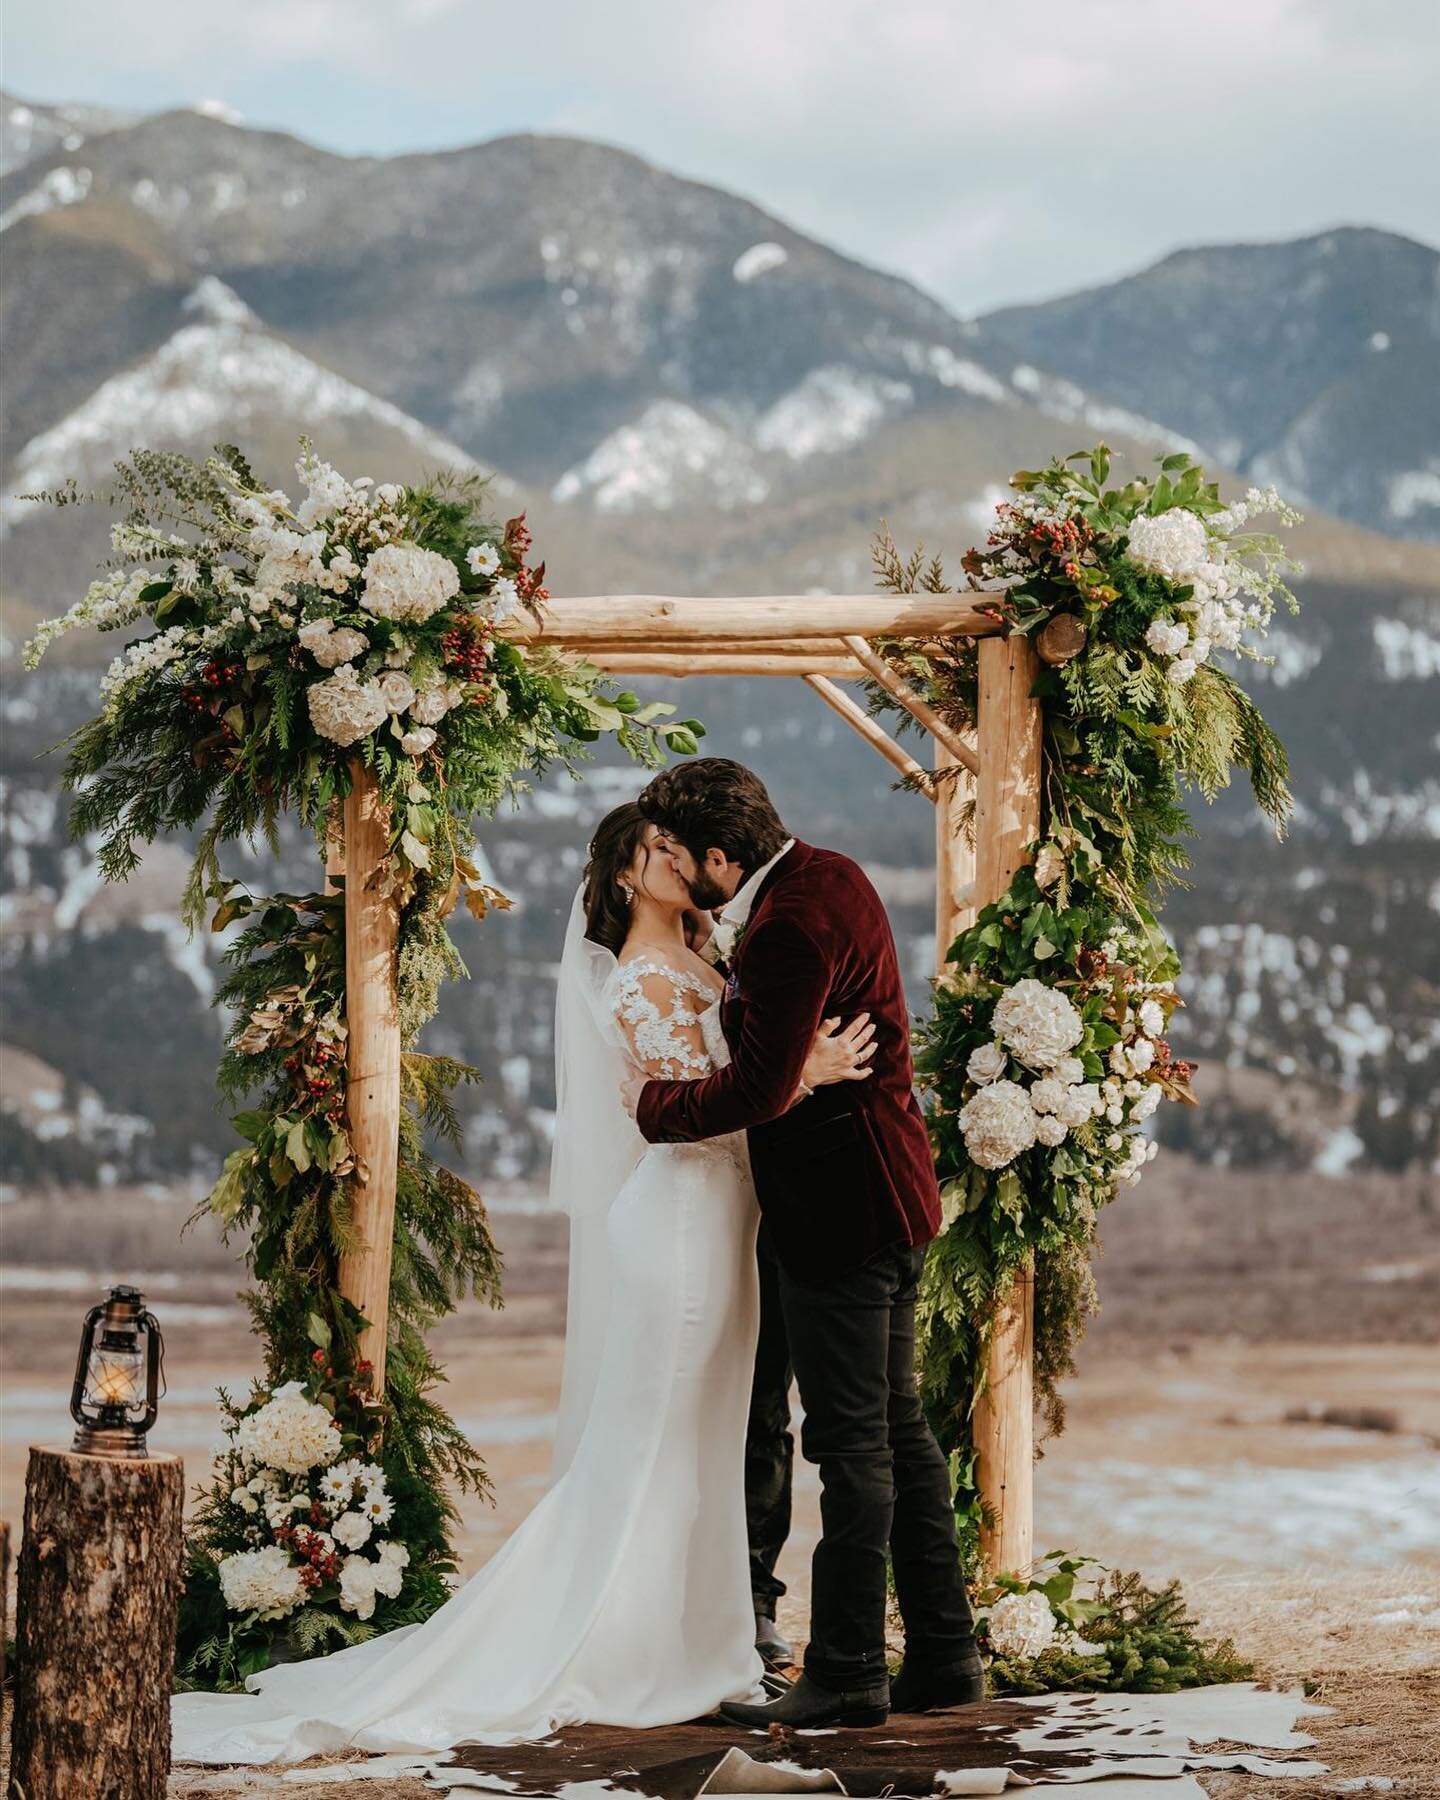 A beautiful intimate wedding in Invermere